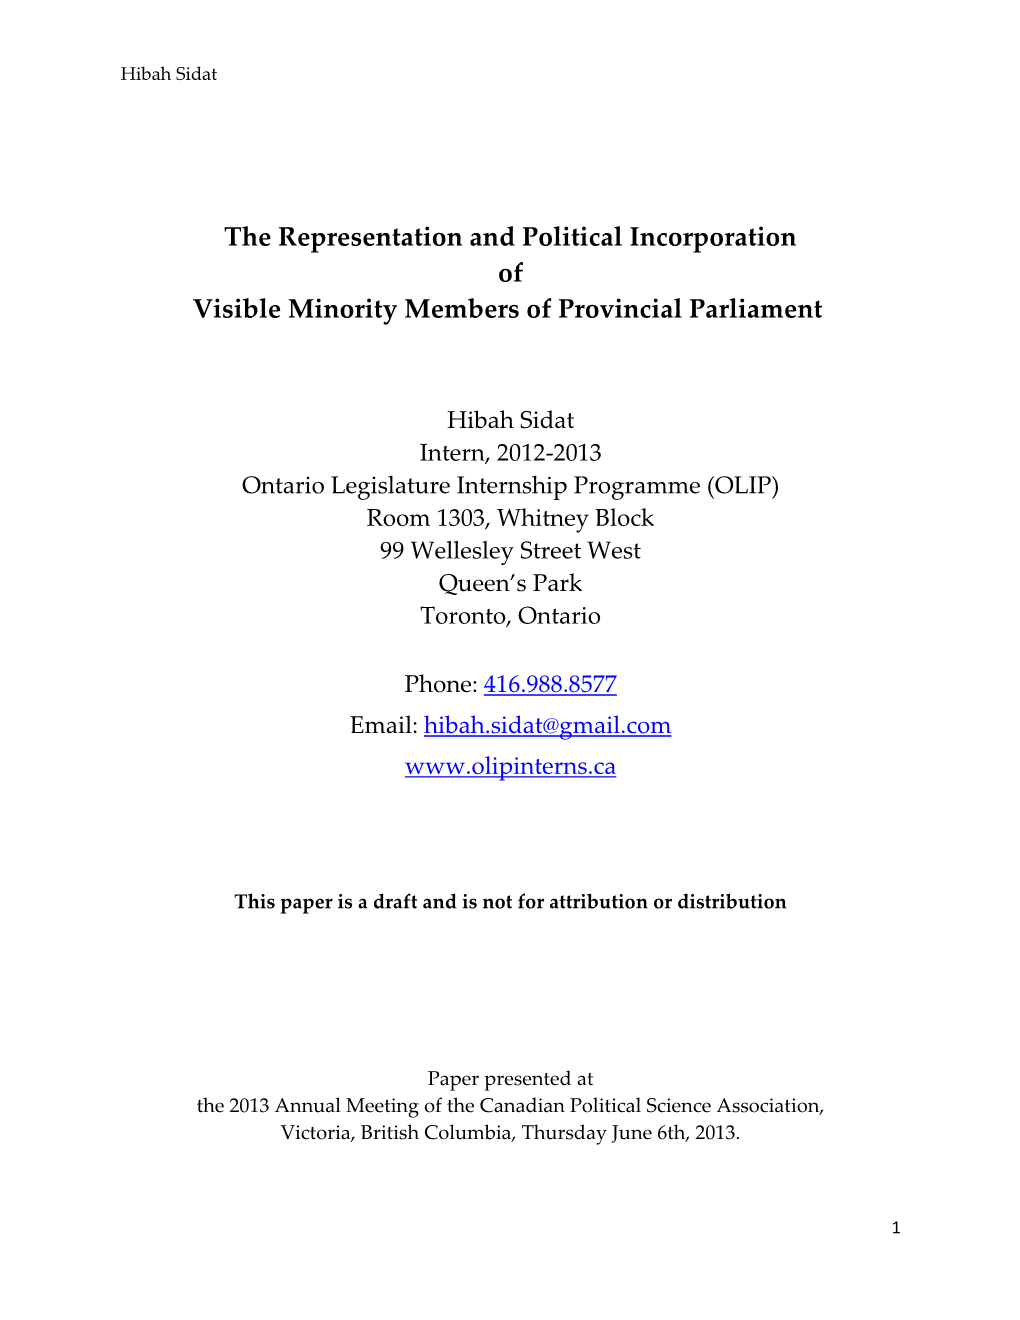 The Representation and Political Incorporation of Visible Minority Members of Provincial Parliament